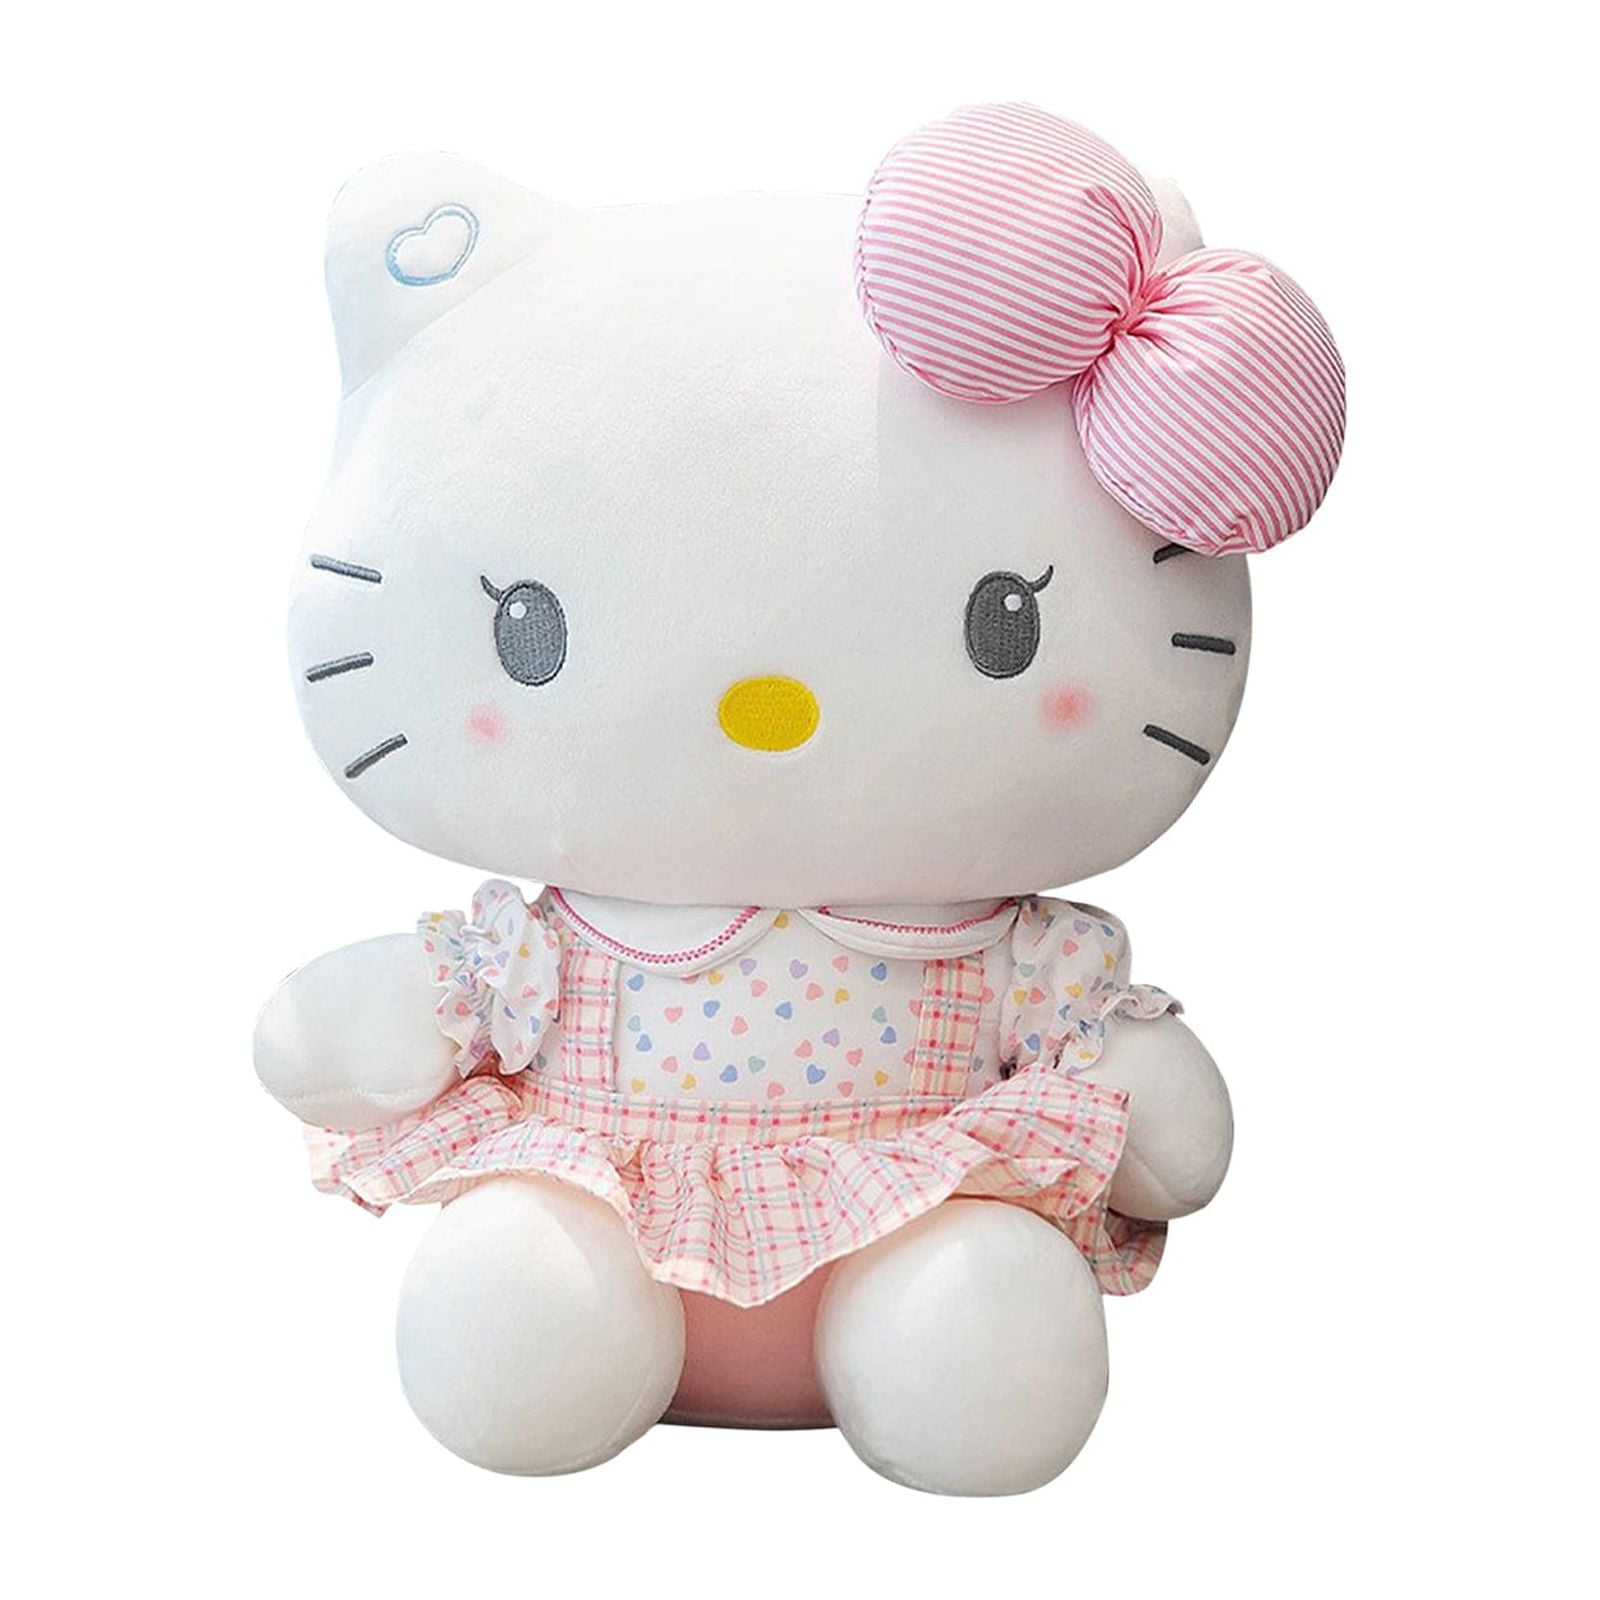  GUND Sanrio Hello Kitty My Melody Plush, Premium Stuffed Animal  for Ages 1 and Up, 9.5”, Pink/White : Toys & Games